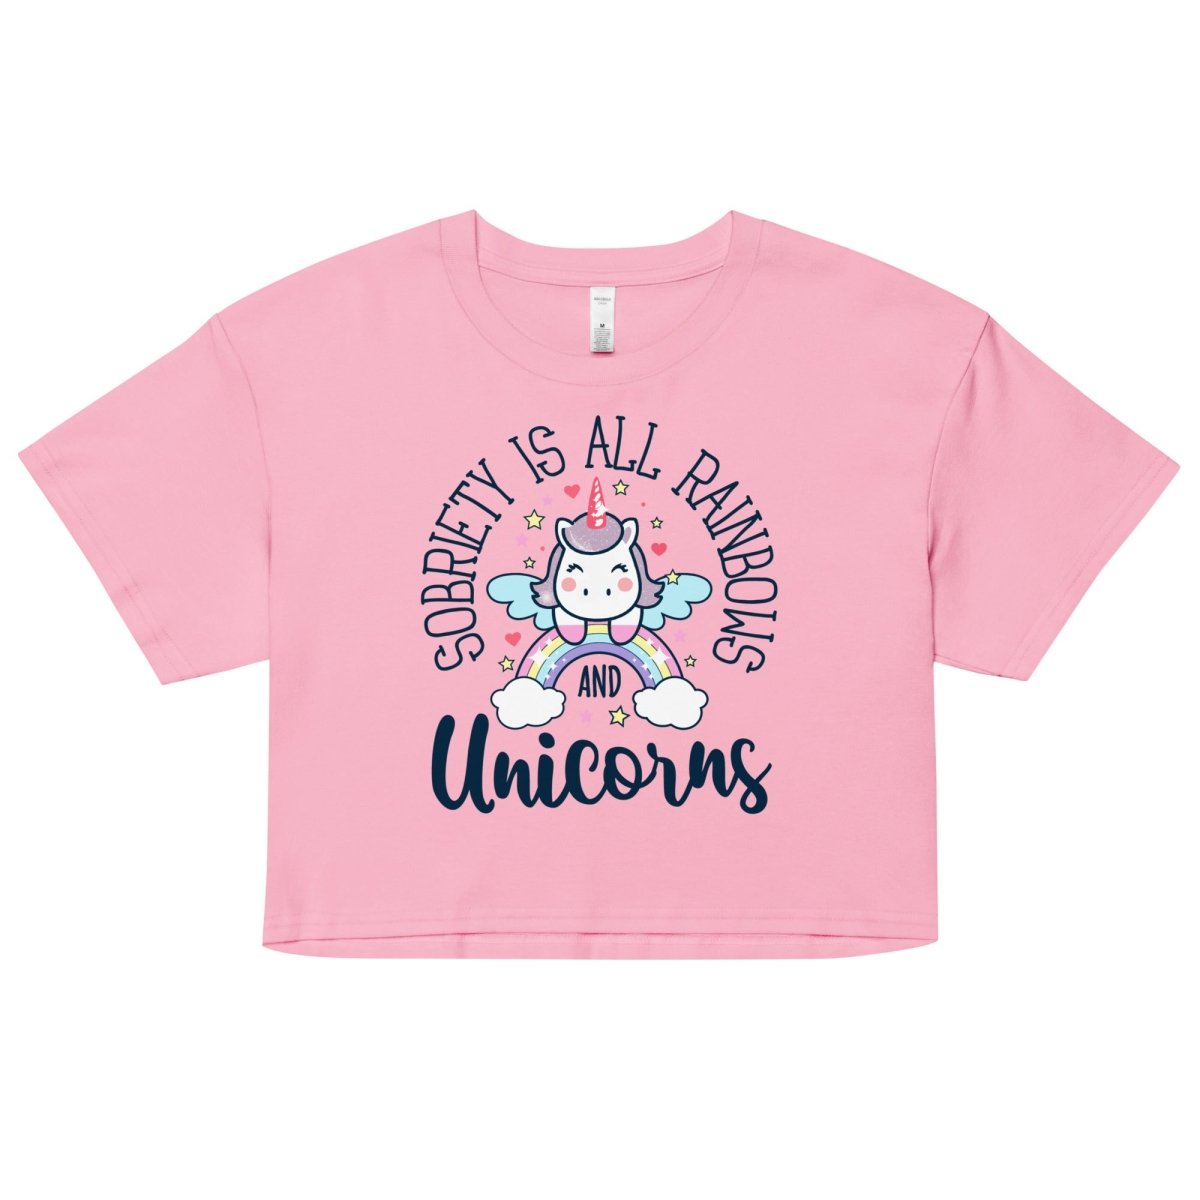 Sobriety is All Rainbows and Unicorns Crop Top for Women - Sobervation